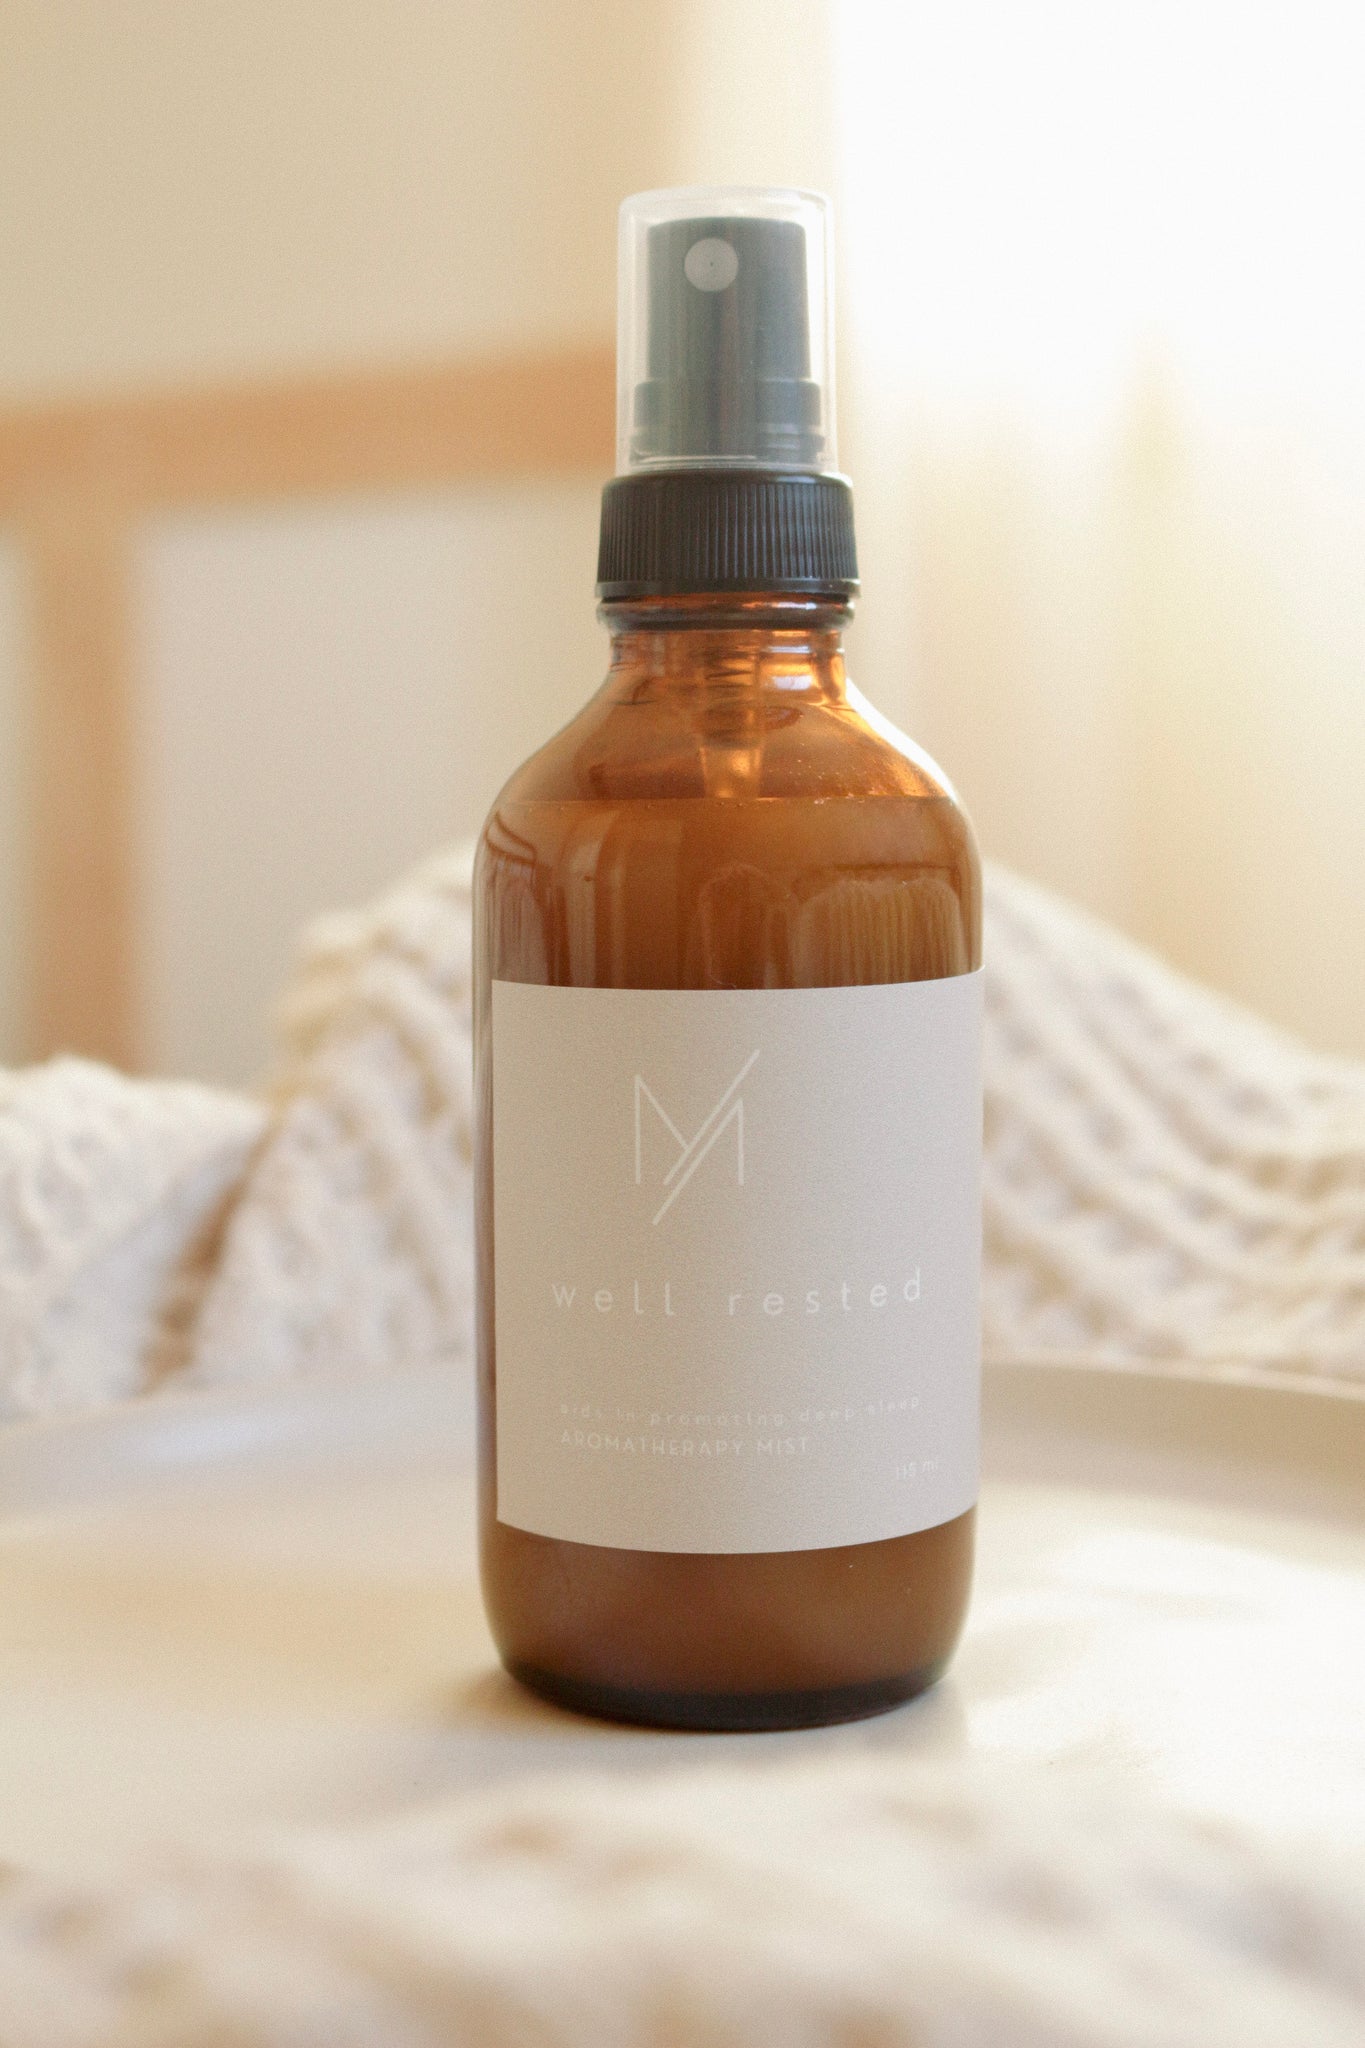 Well Rested Aromatherapy Mist